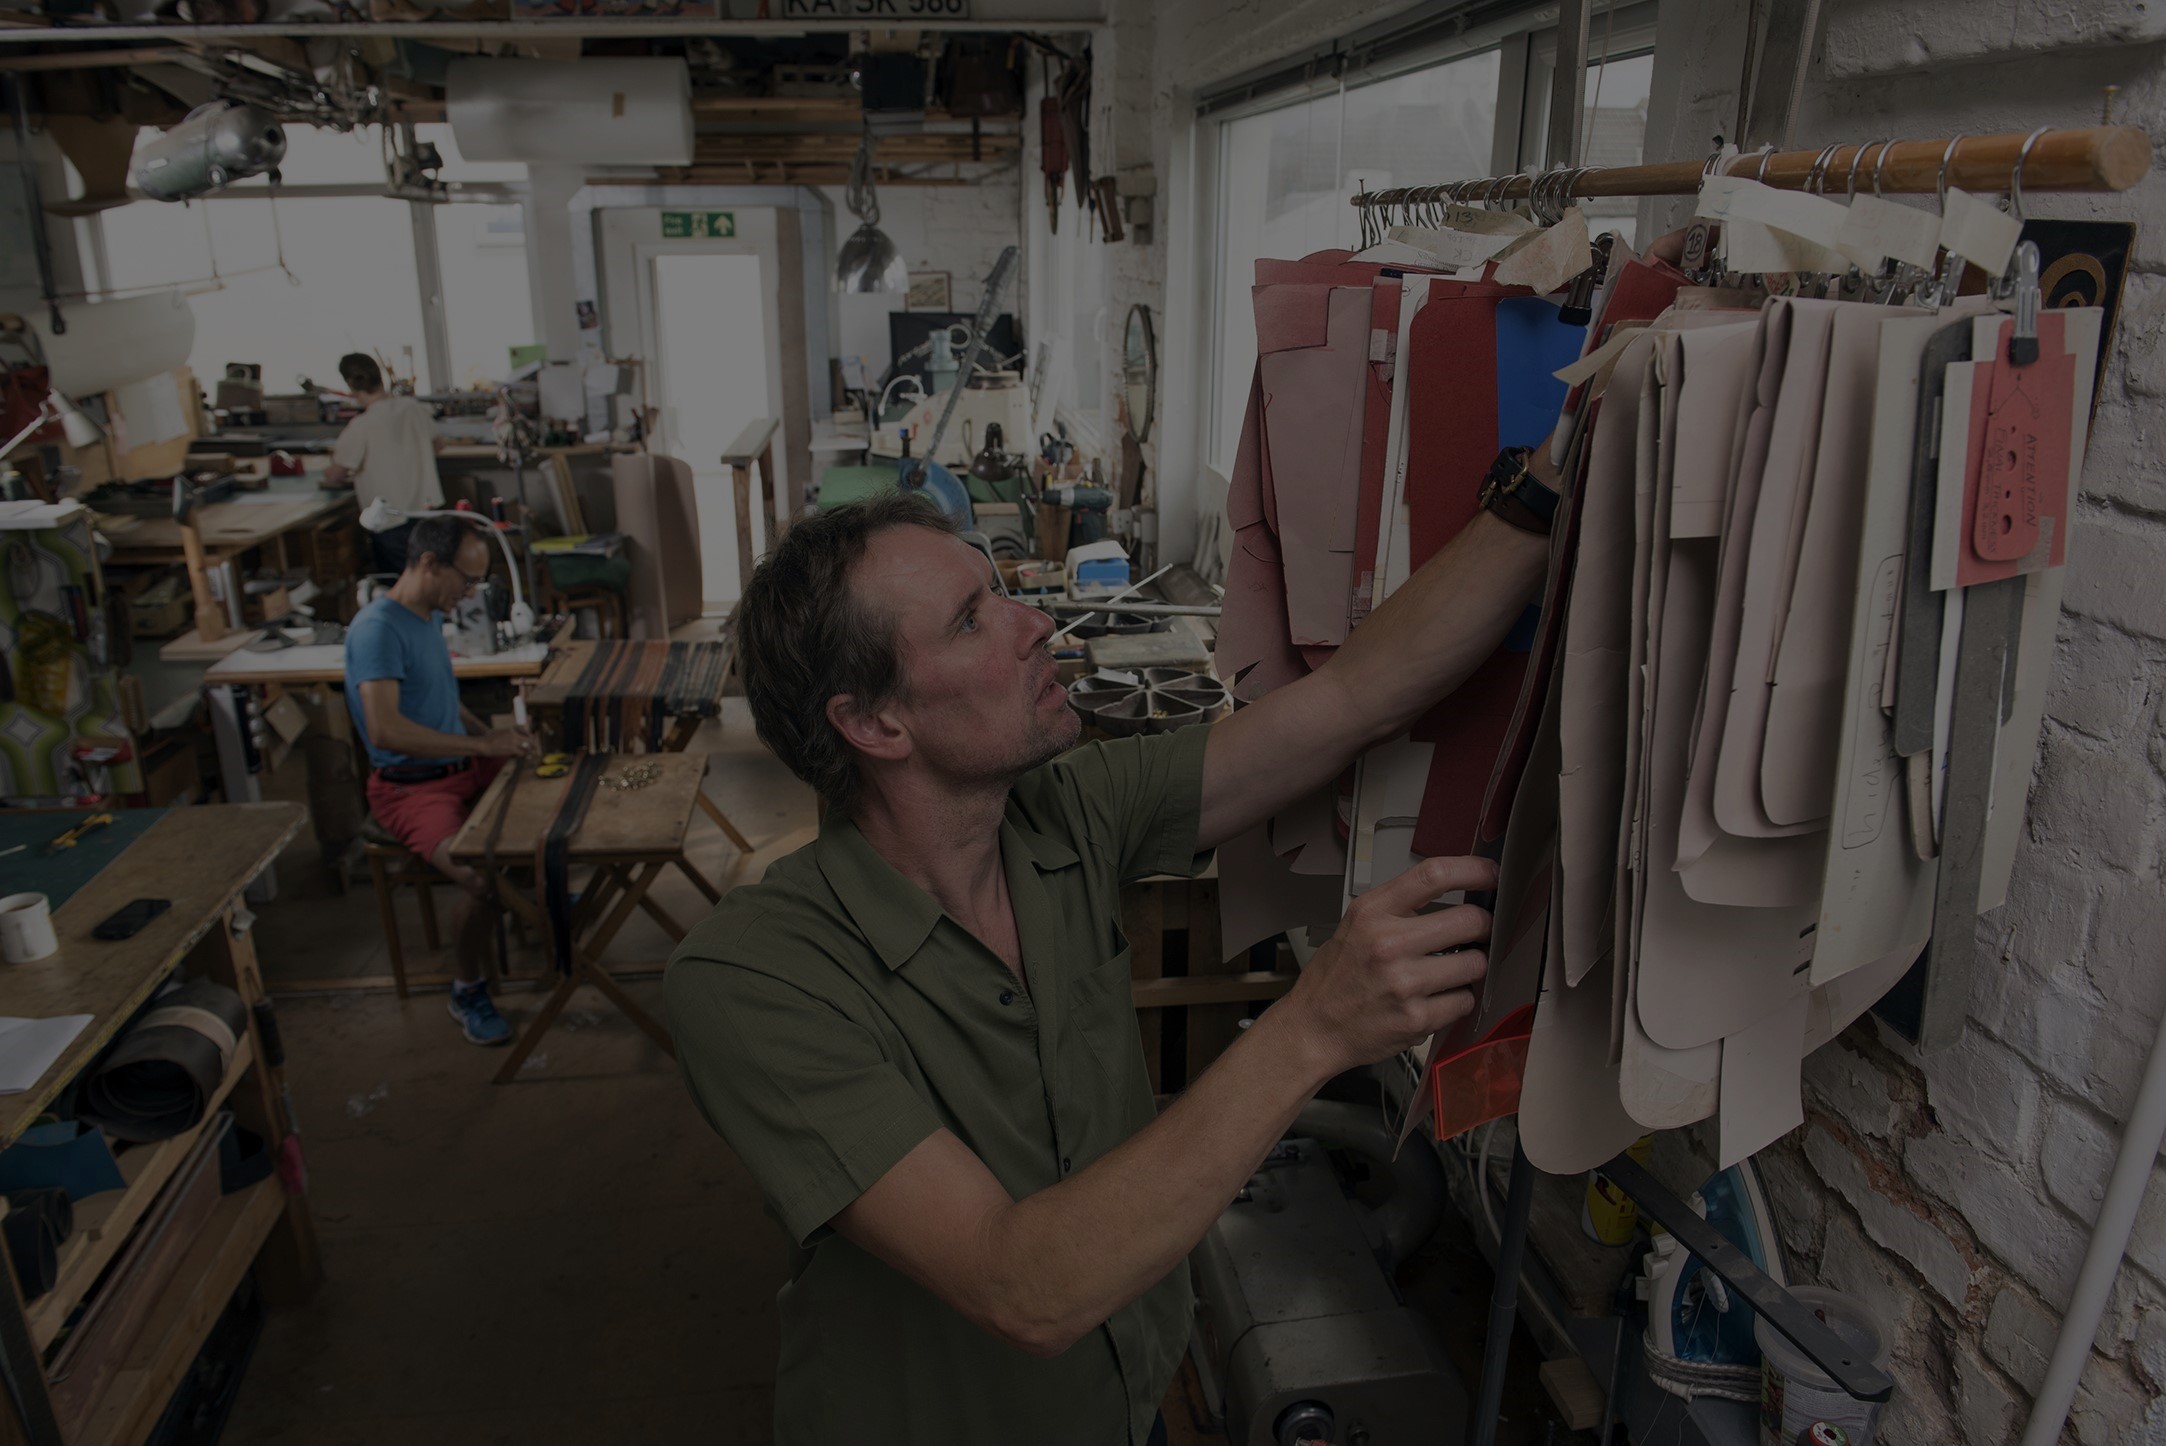 Wolfram Lohr is the Brighton-based maker championing traceable leather design